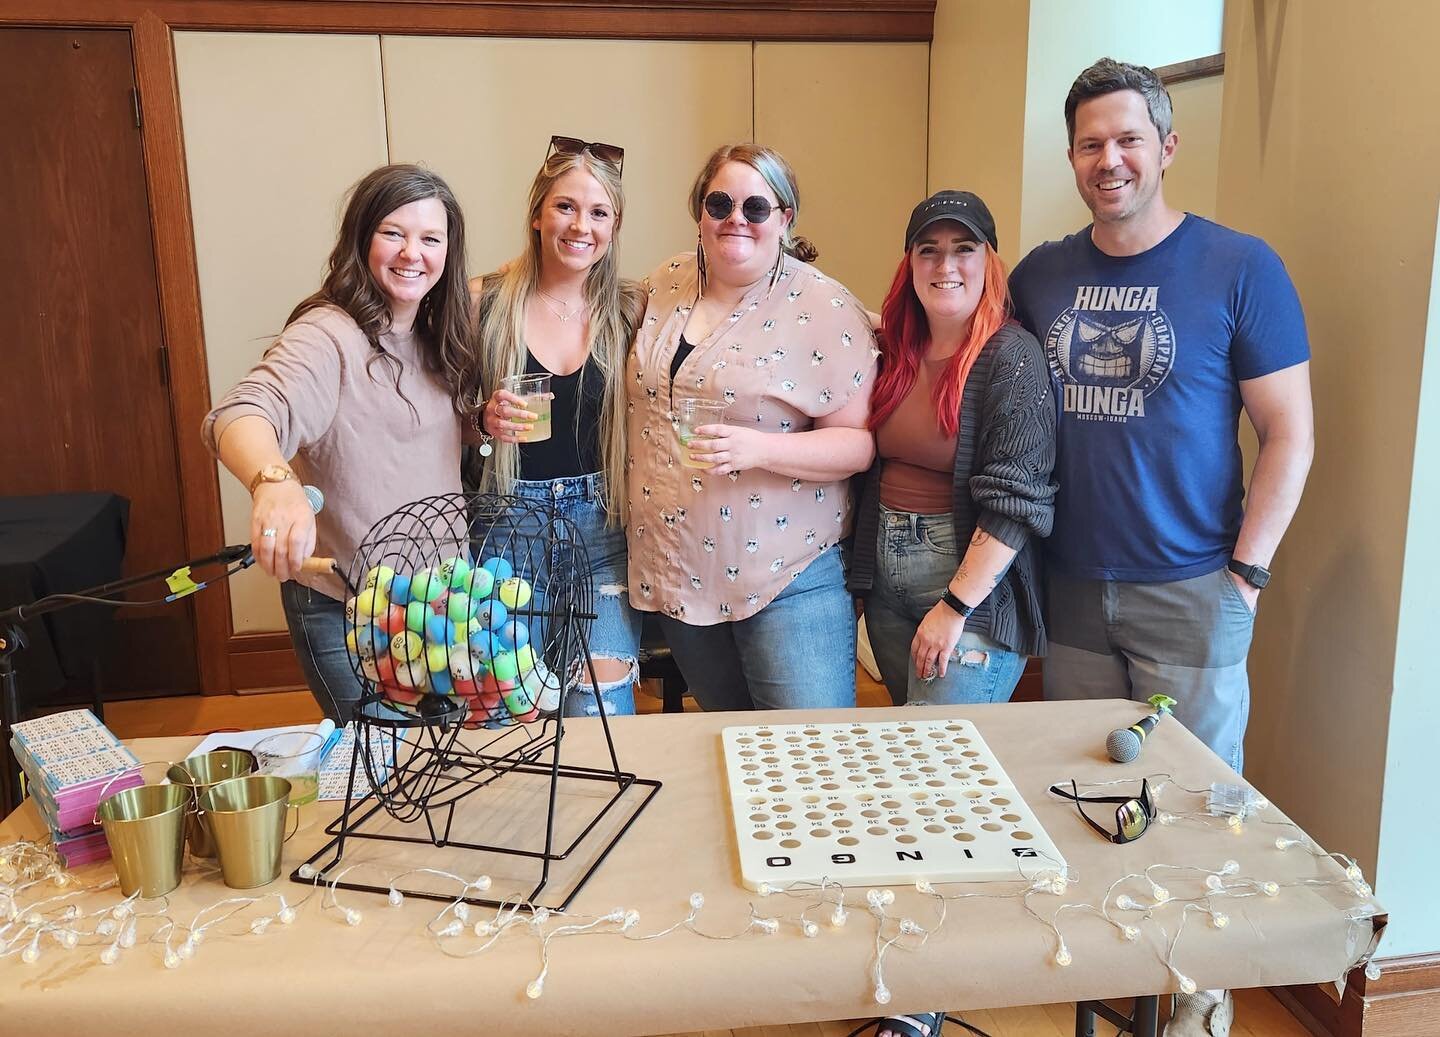 We love Bingo nights! 

Thanks to everyone who showed up last night and helped us raise funds for the Human Society of the Palouse! Next month&rsquo;s is scheduled for Thursday, June 22. See you then!